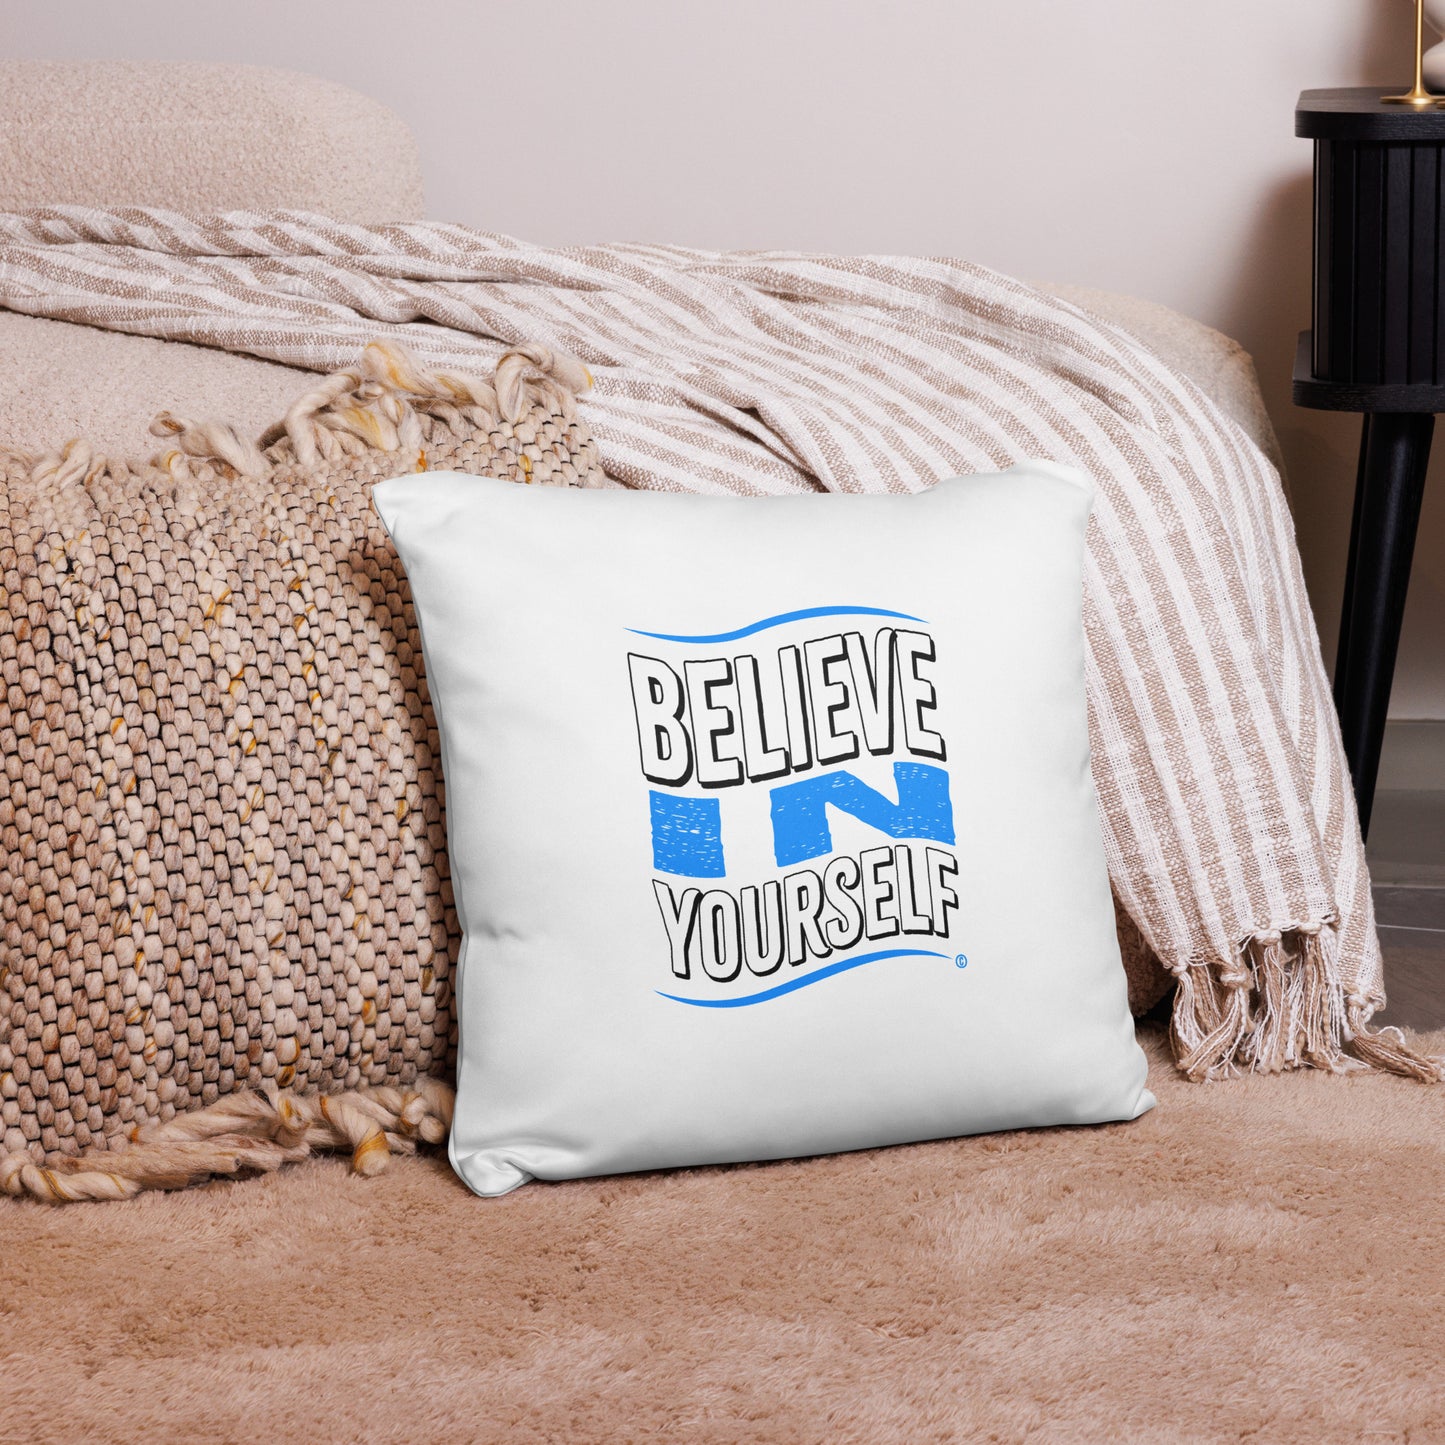 Believe in Yourself Basic Pillows